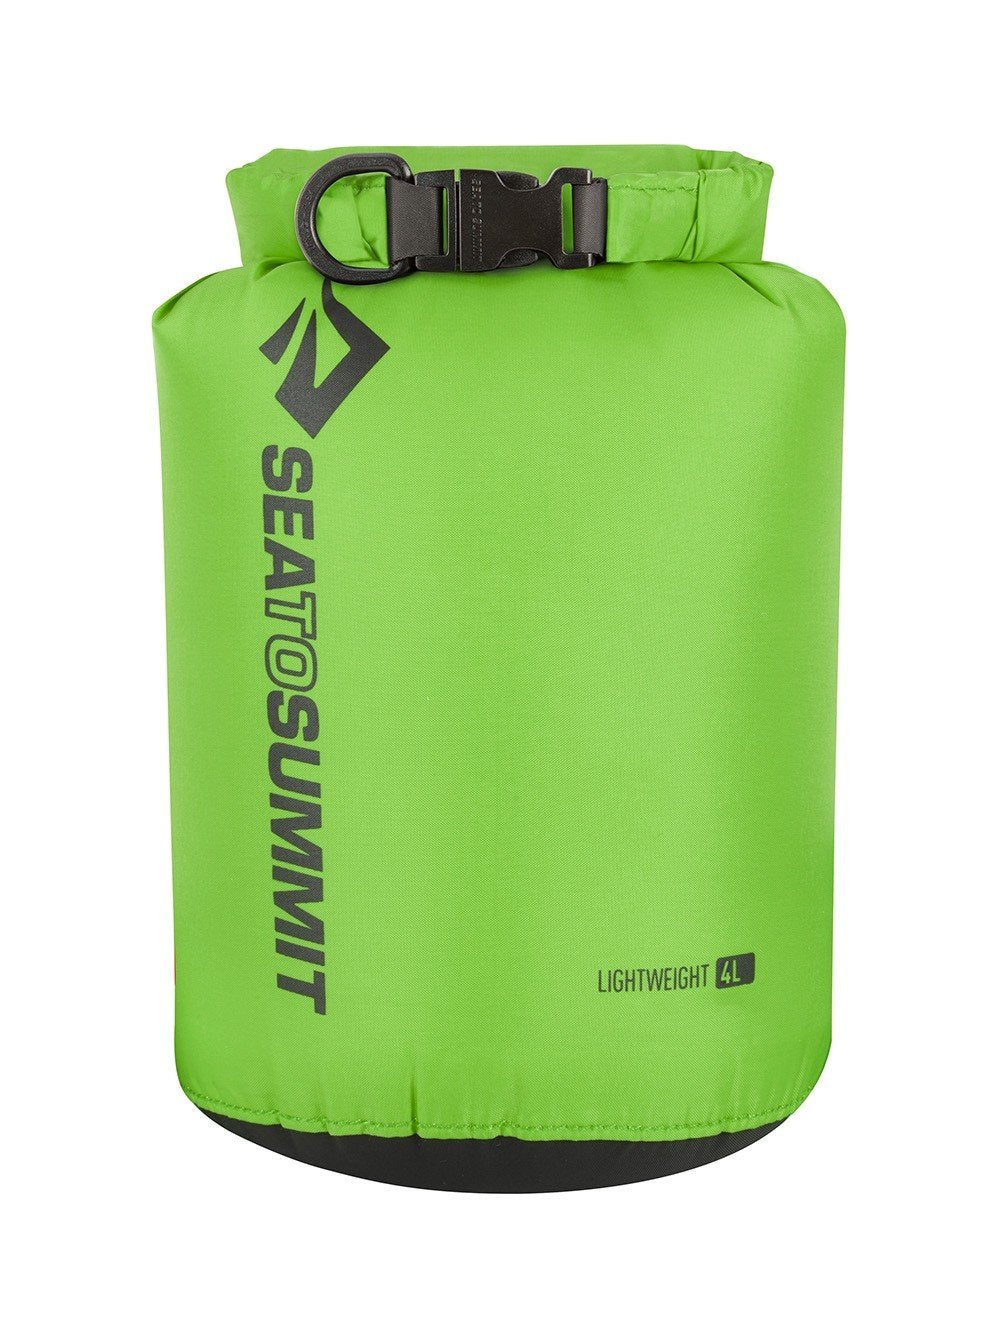 Sea To Summit Lightweight 70D 4 Litres Dry Sack Bags, Packs and Cases Sea To Summit Green Tactical Gear Supplier Tactical Distributors Australia